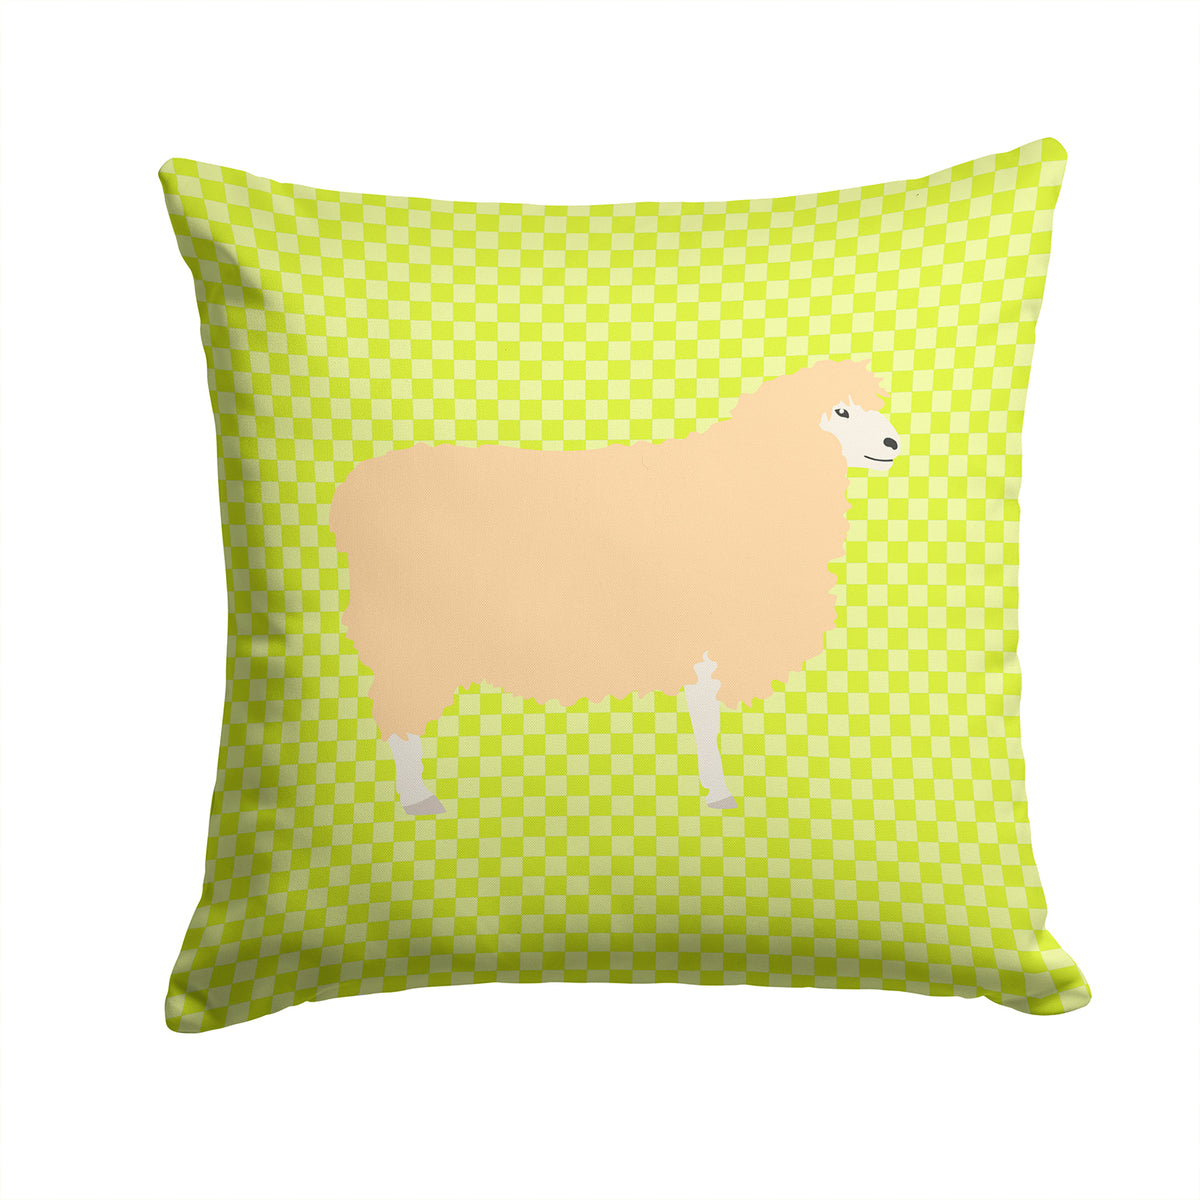 English Leicester Longwool Sheep Green Fabric Decorative Pillow BB7800PW1414 - the-store.com